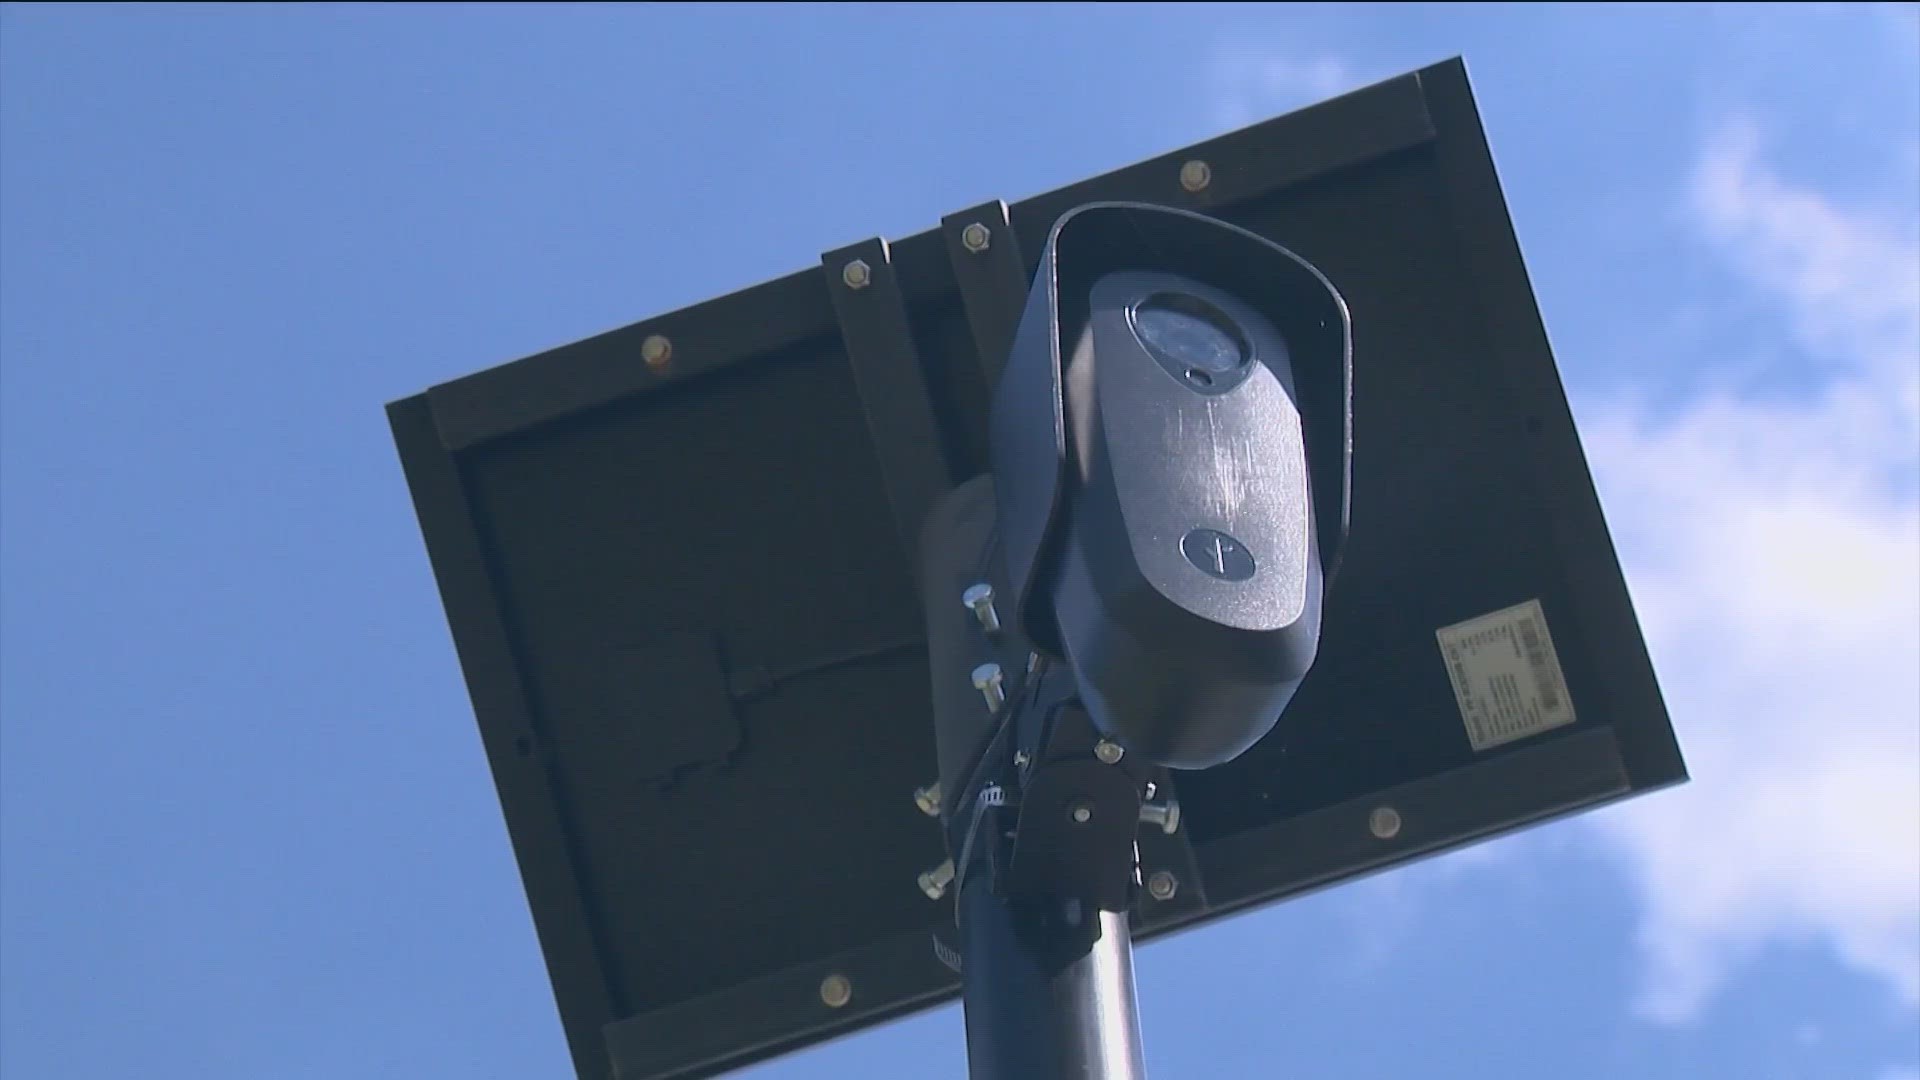 A motion to amend the pilot program to bring license plate reader cameras back to Austin failed at Thursday's city council meeting. KVUE's Eric Pointer has more.